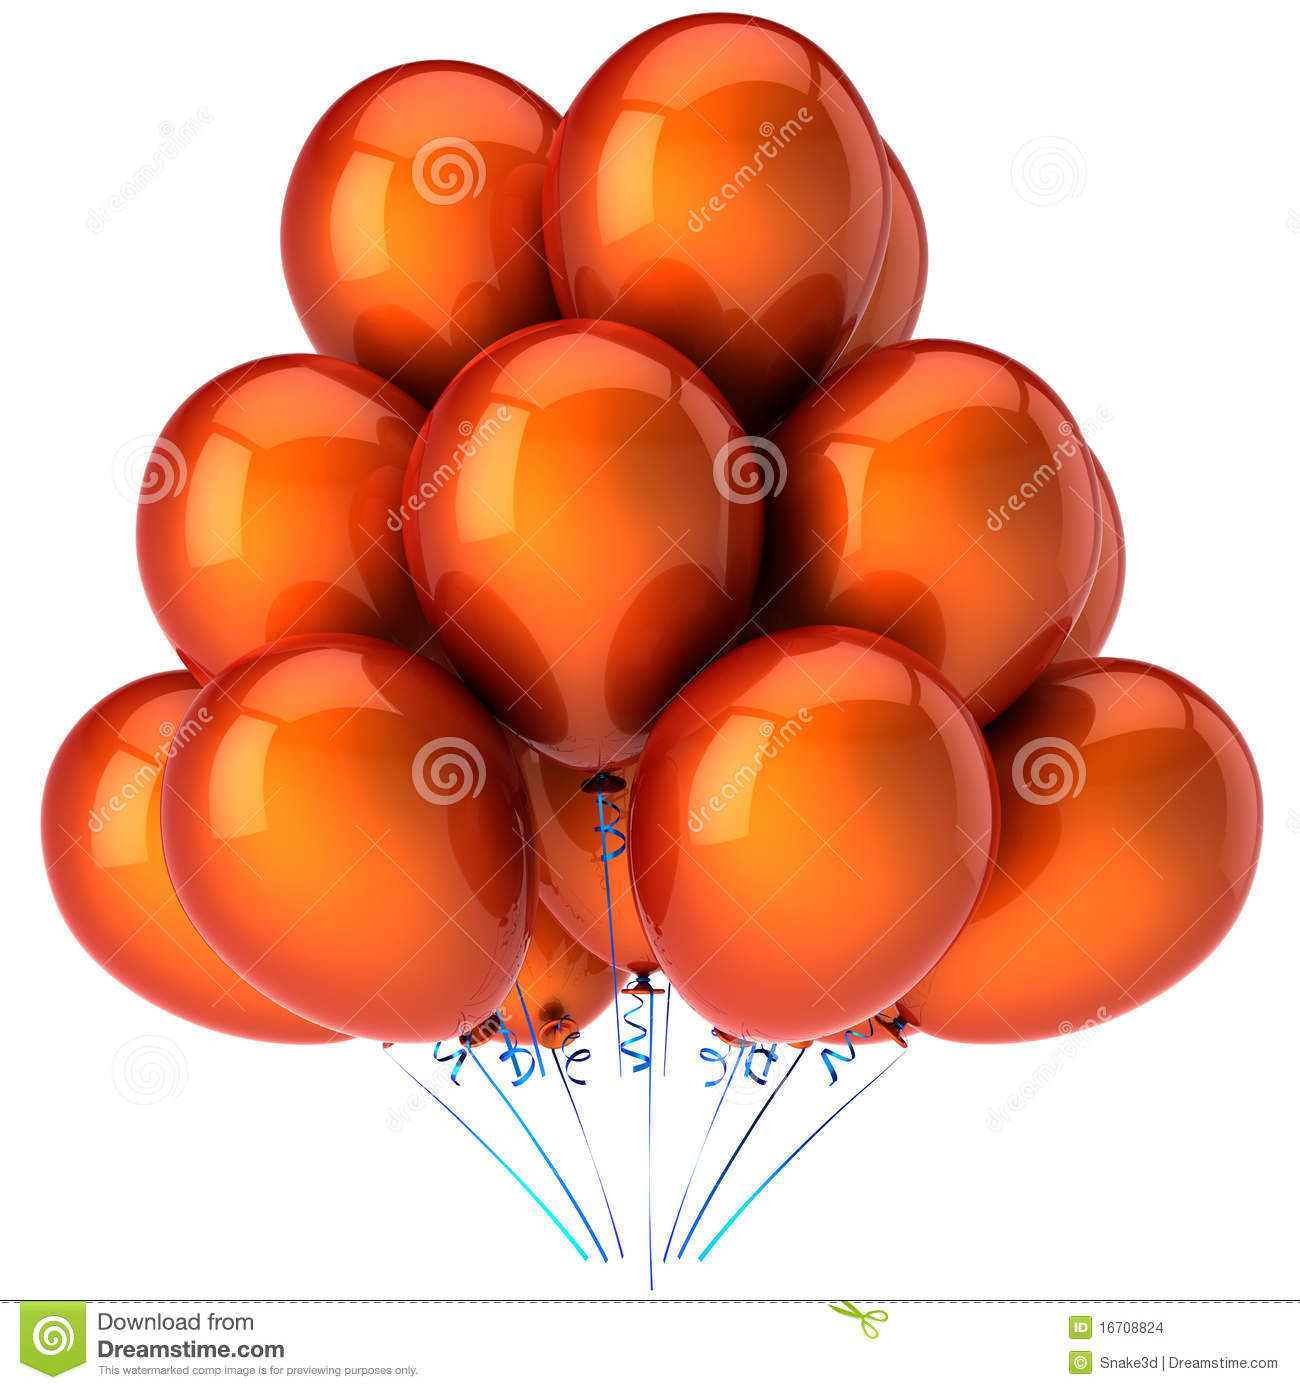 Orange Glossy Helium Party Balloons  Shiny And Beautiful  This Is A